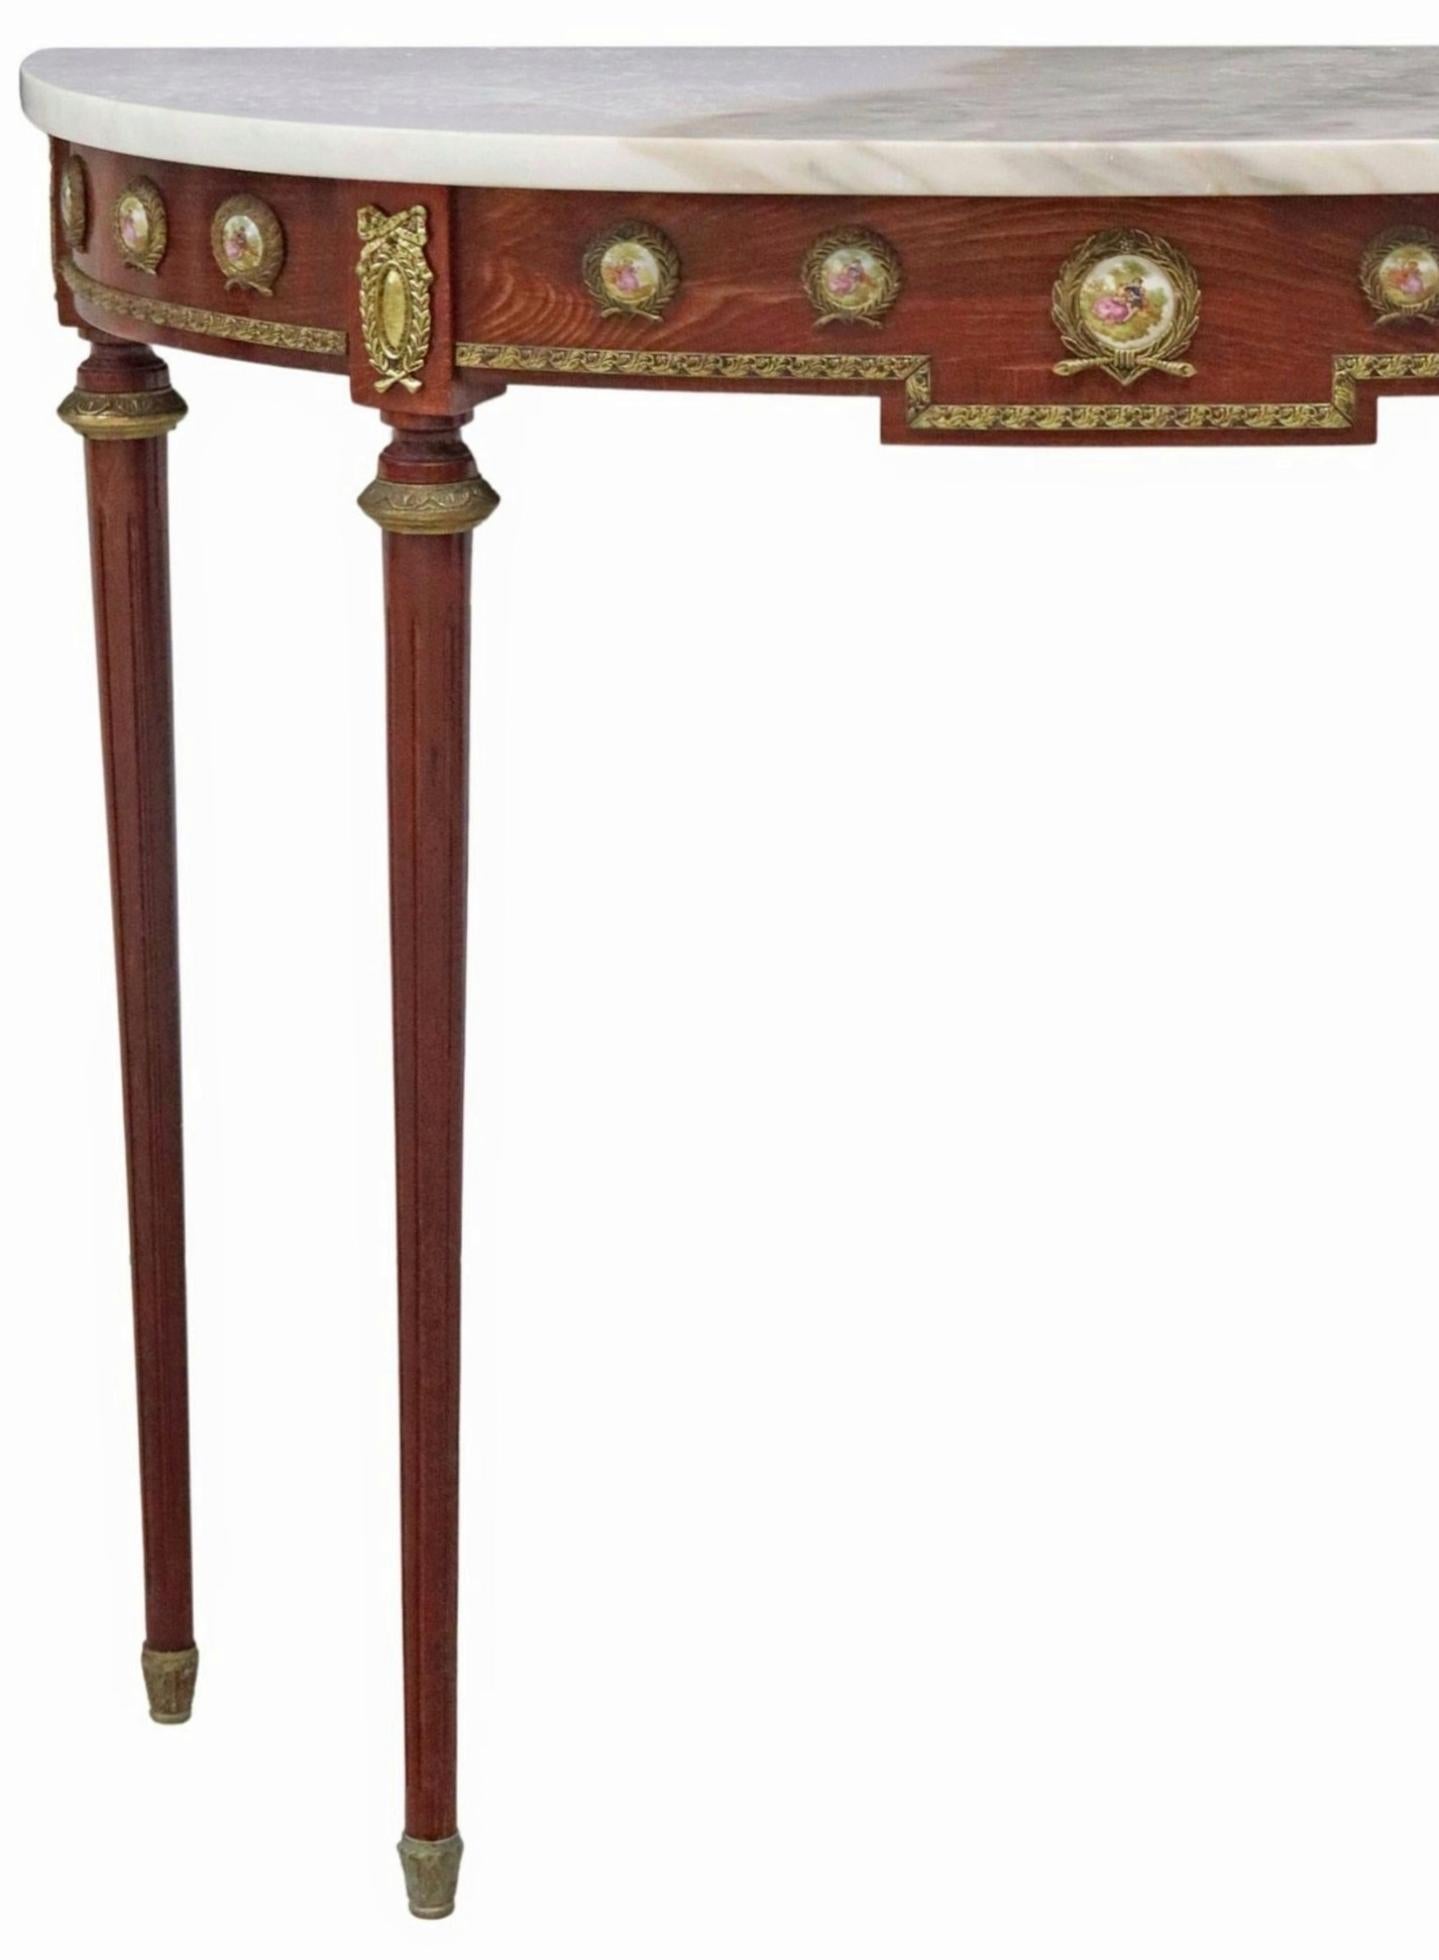 Gilt Fine Louis XVI Revival Console Table by Harry & Lou Epstein For Sale